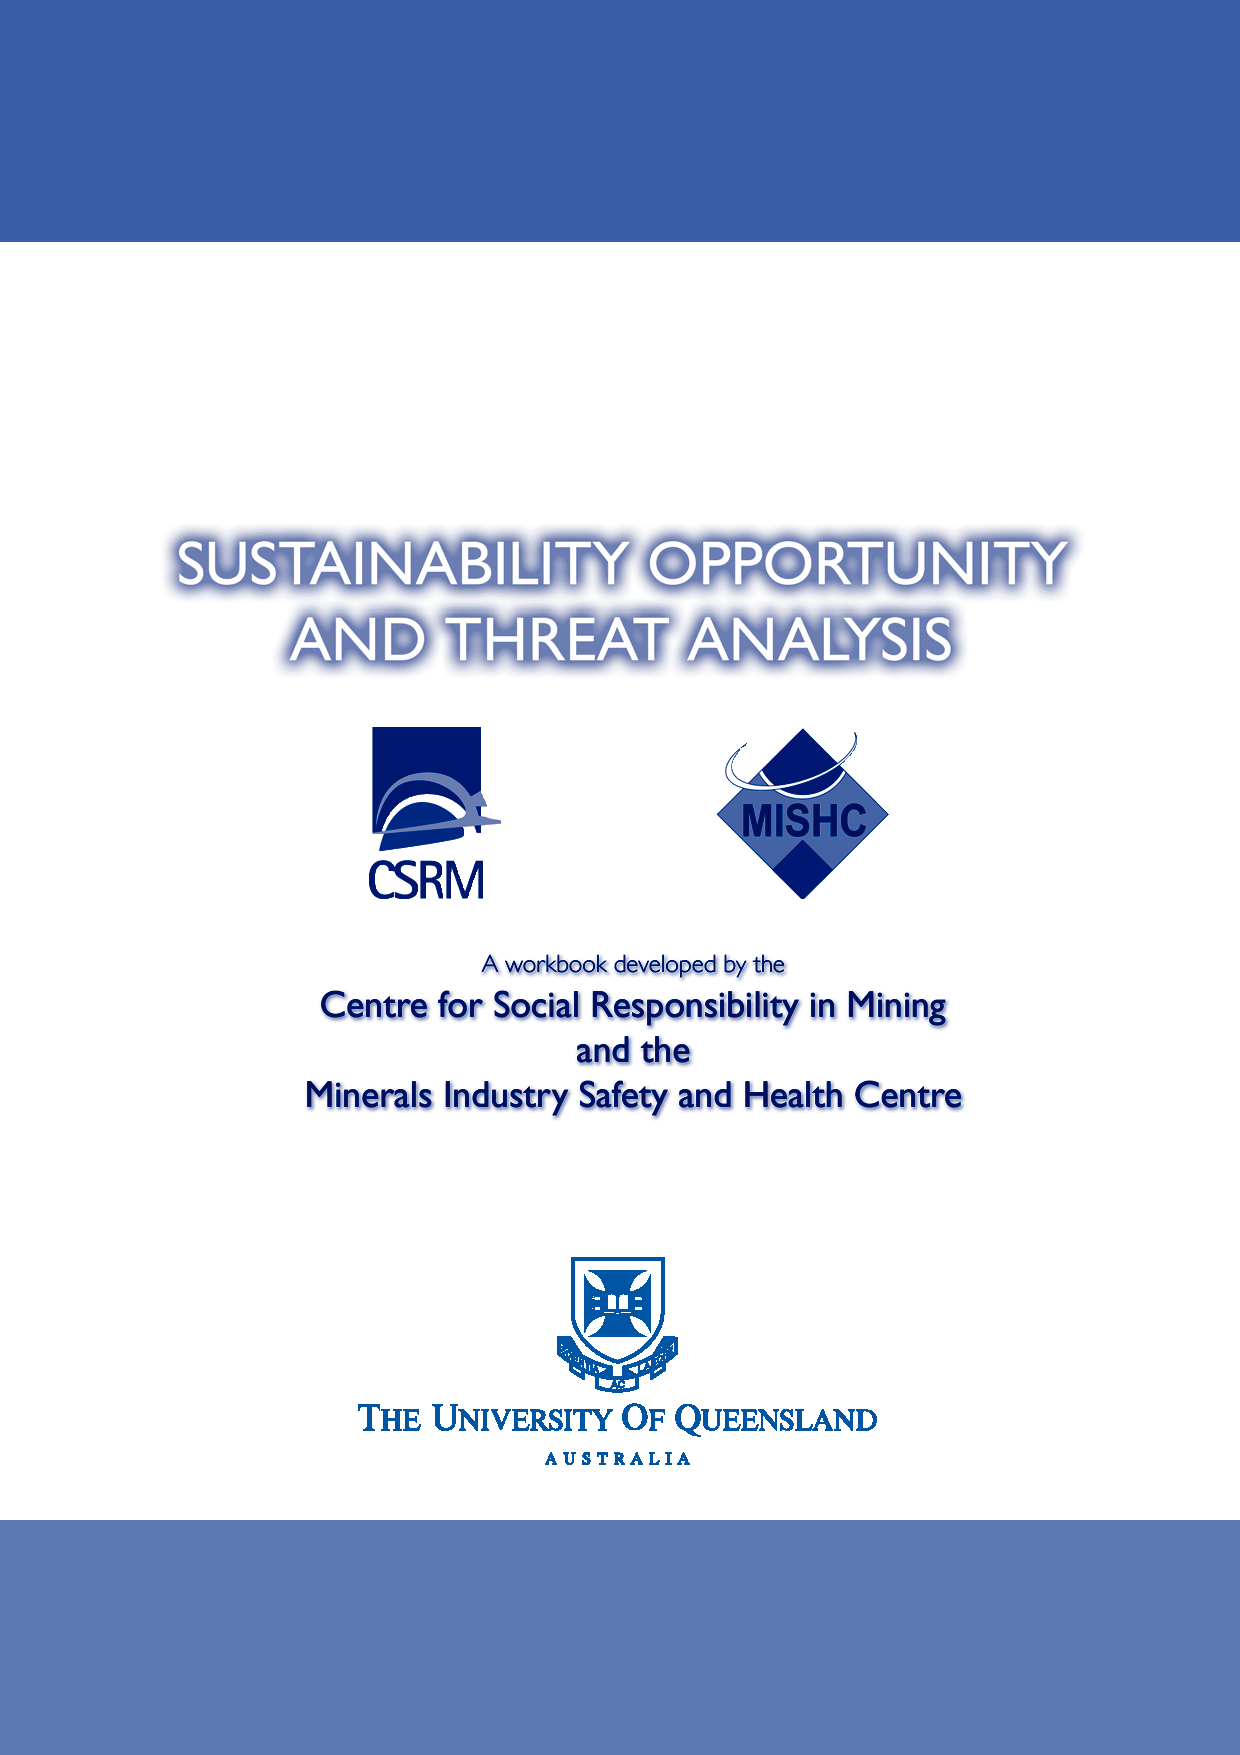 Sustainability opportunity and threat analysis